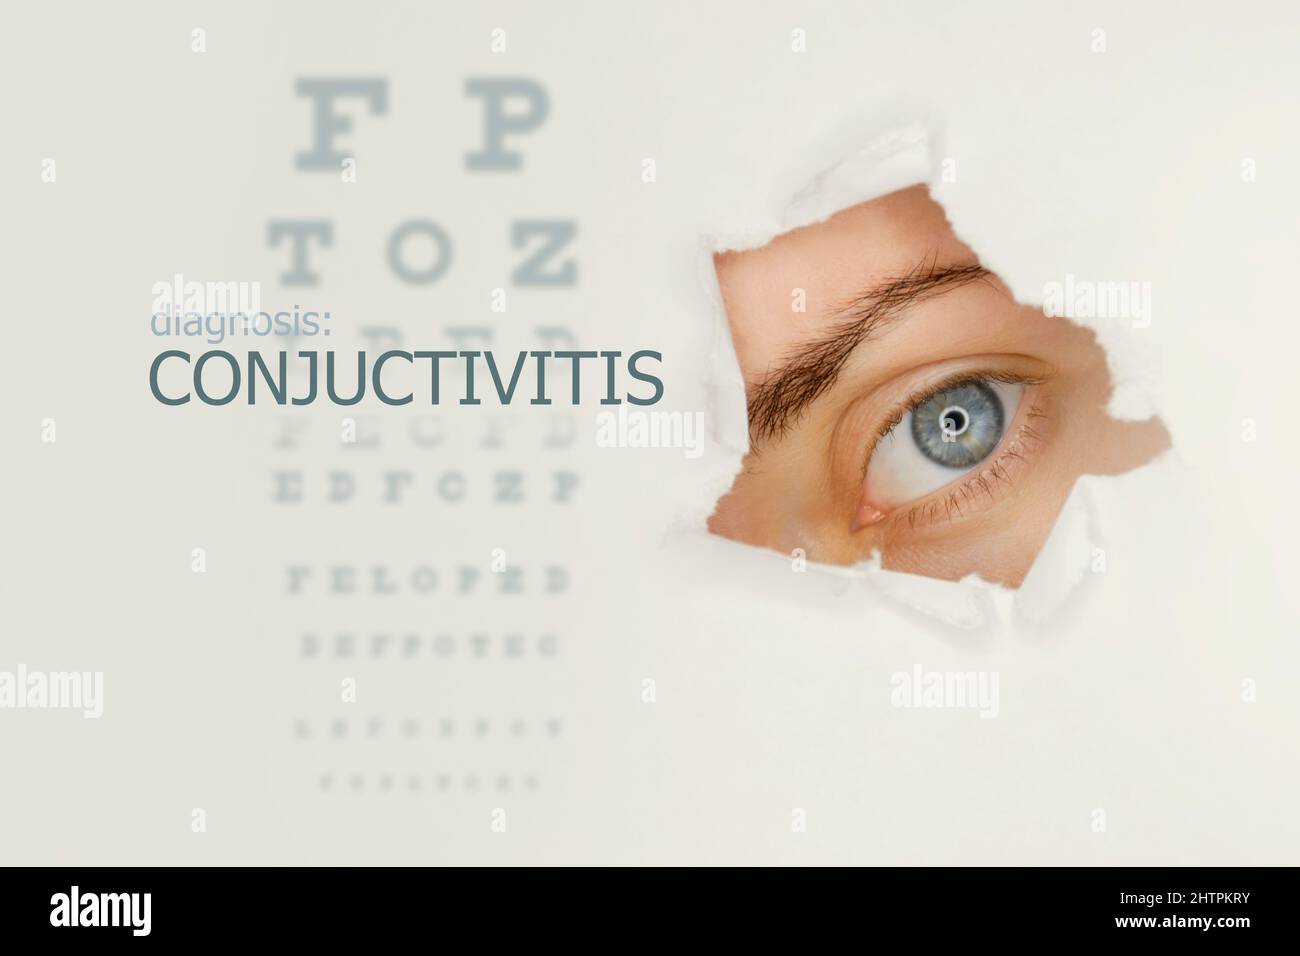 Conjuctivitis disease poster with eye test chart and blue eye on right. Studio grey background Stock Photo